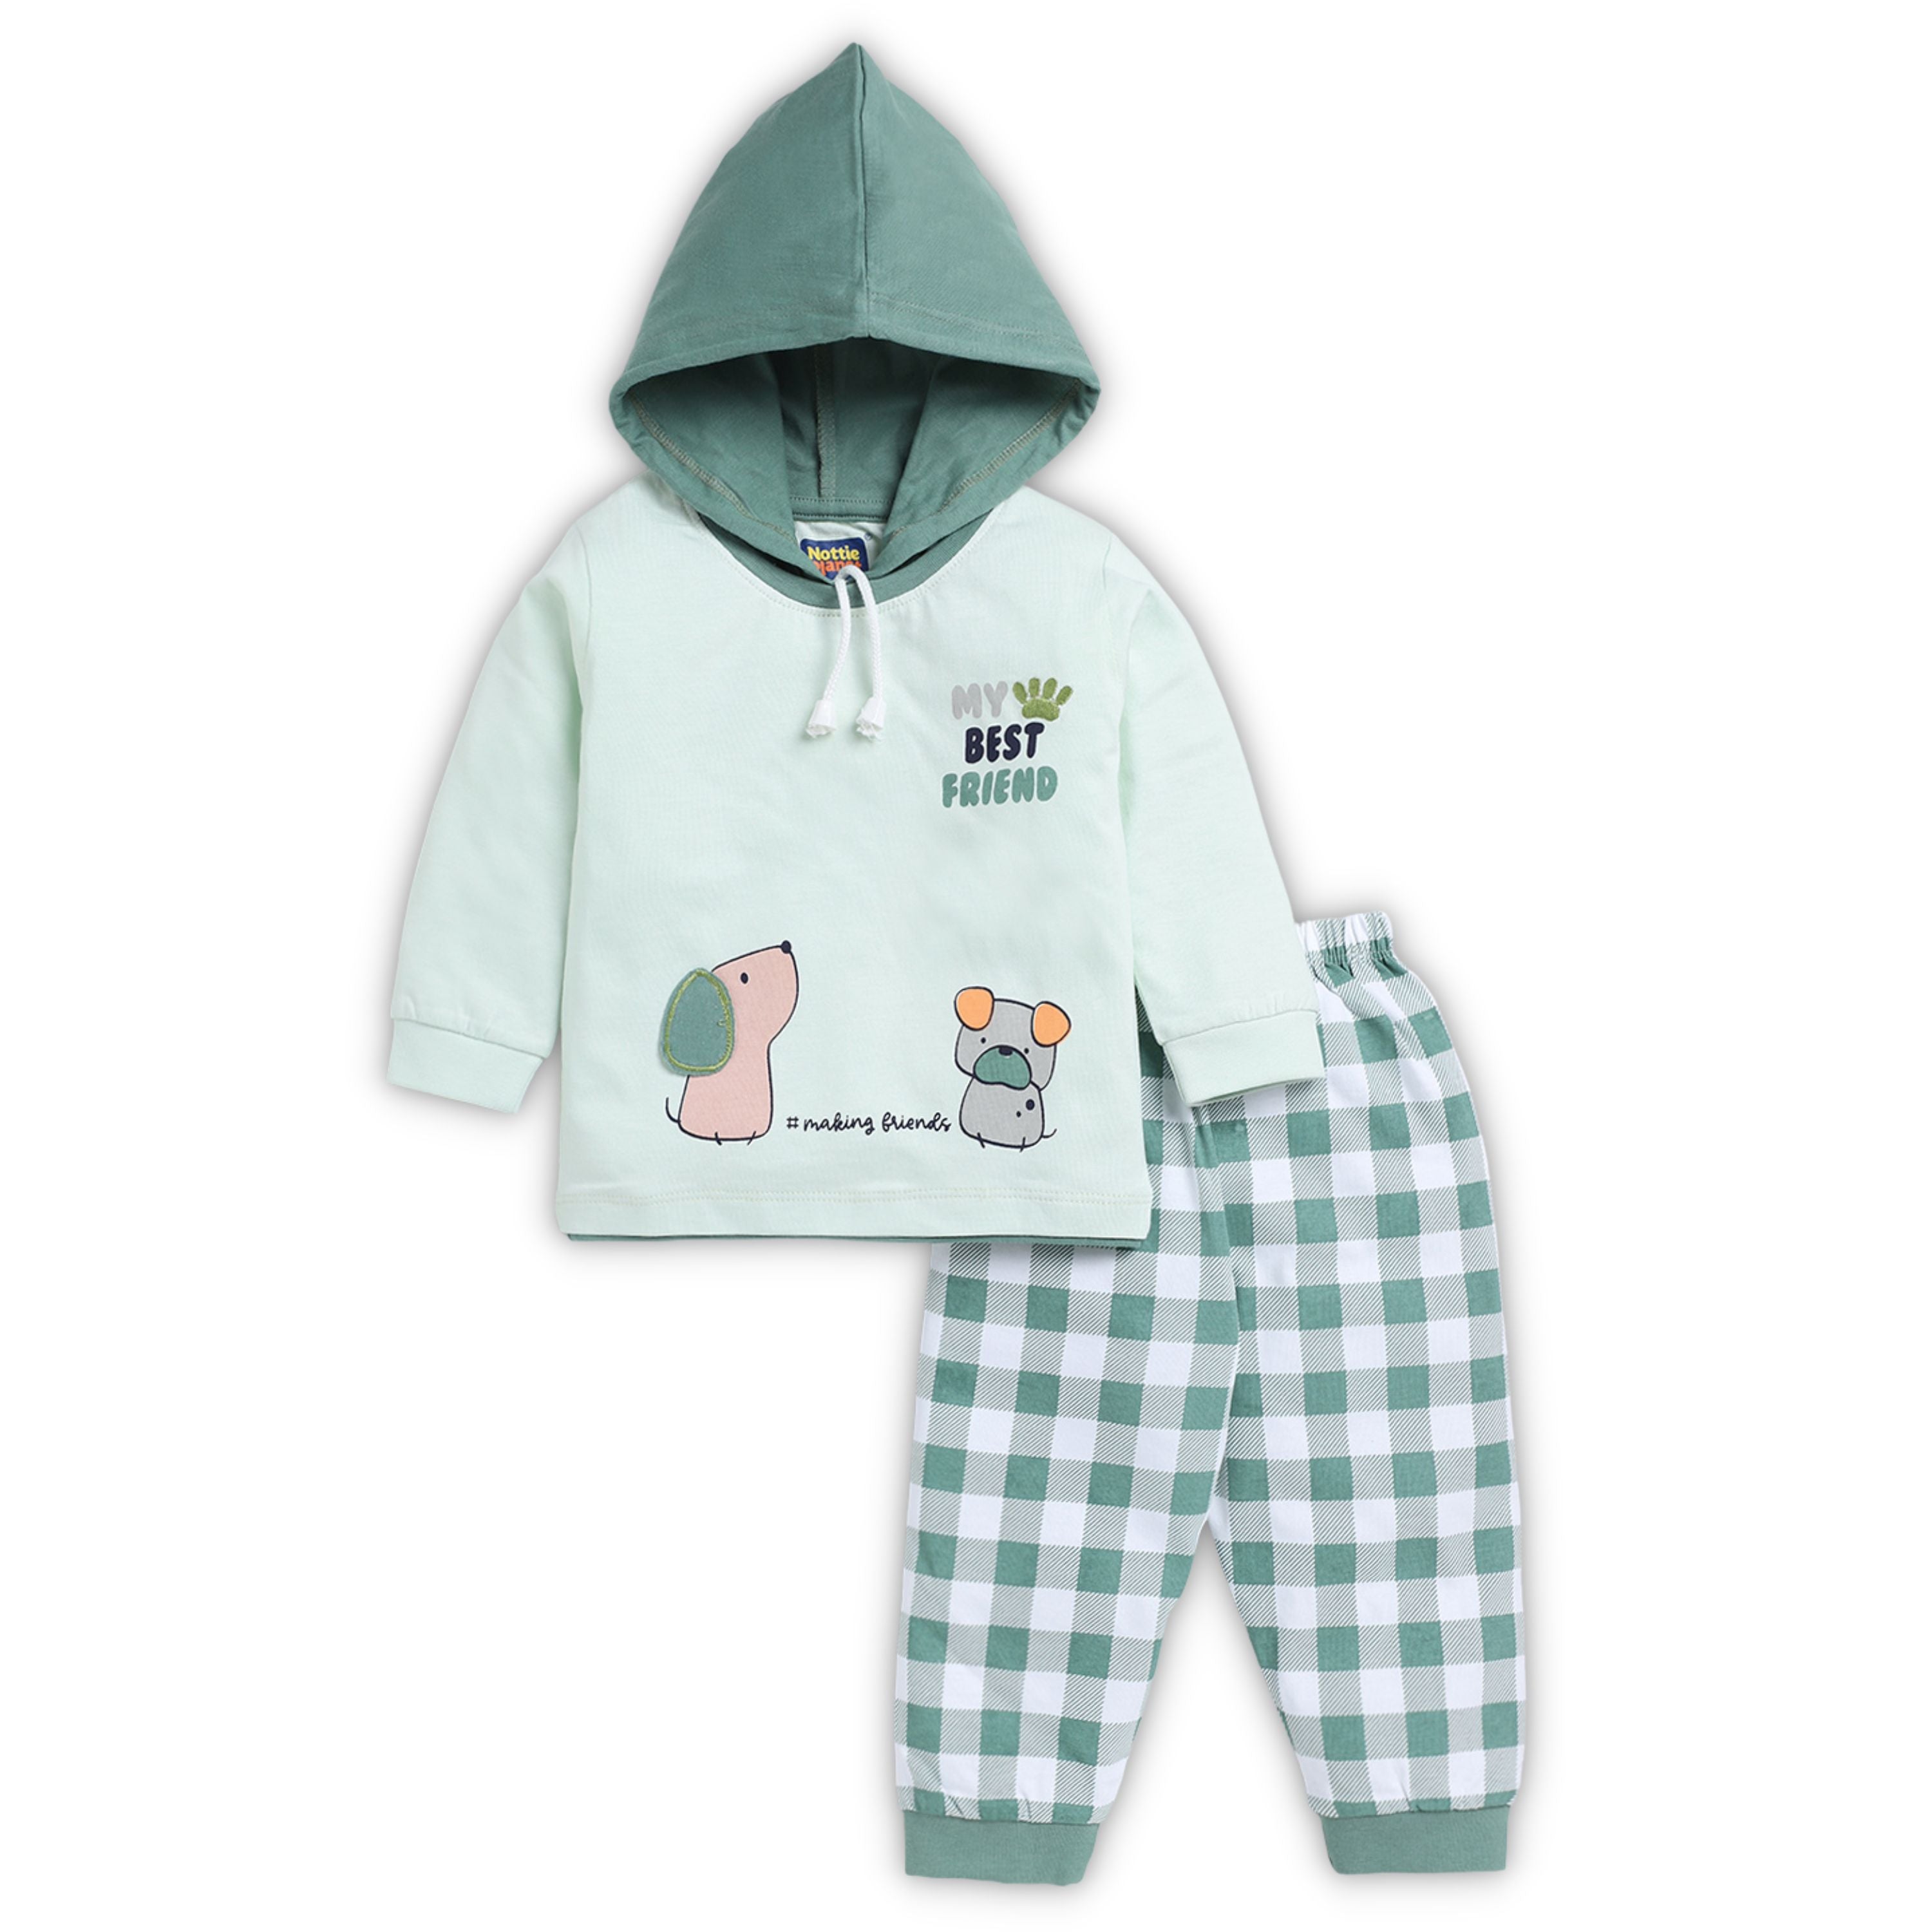 HOODED CLOTHING SET FOR BOY - OLIVE GREEN